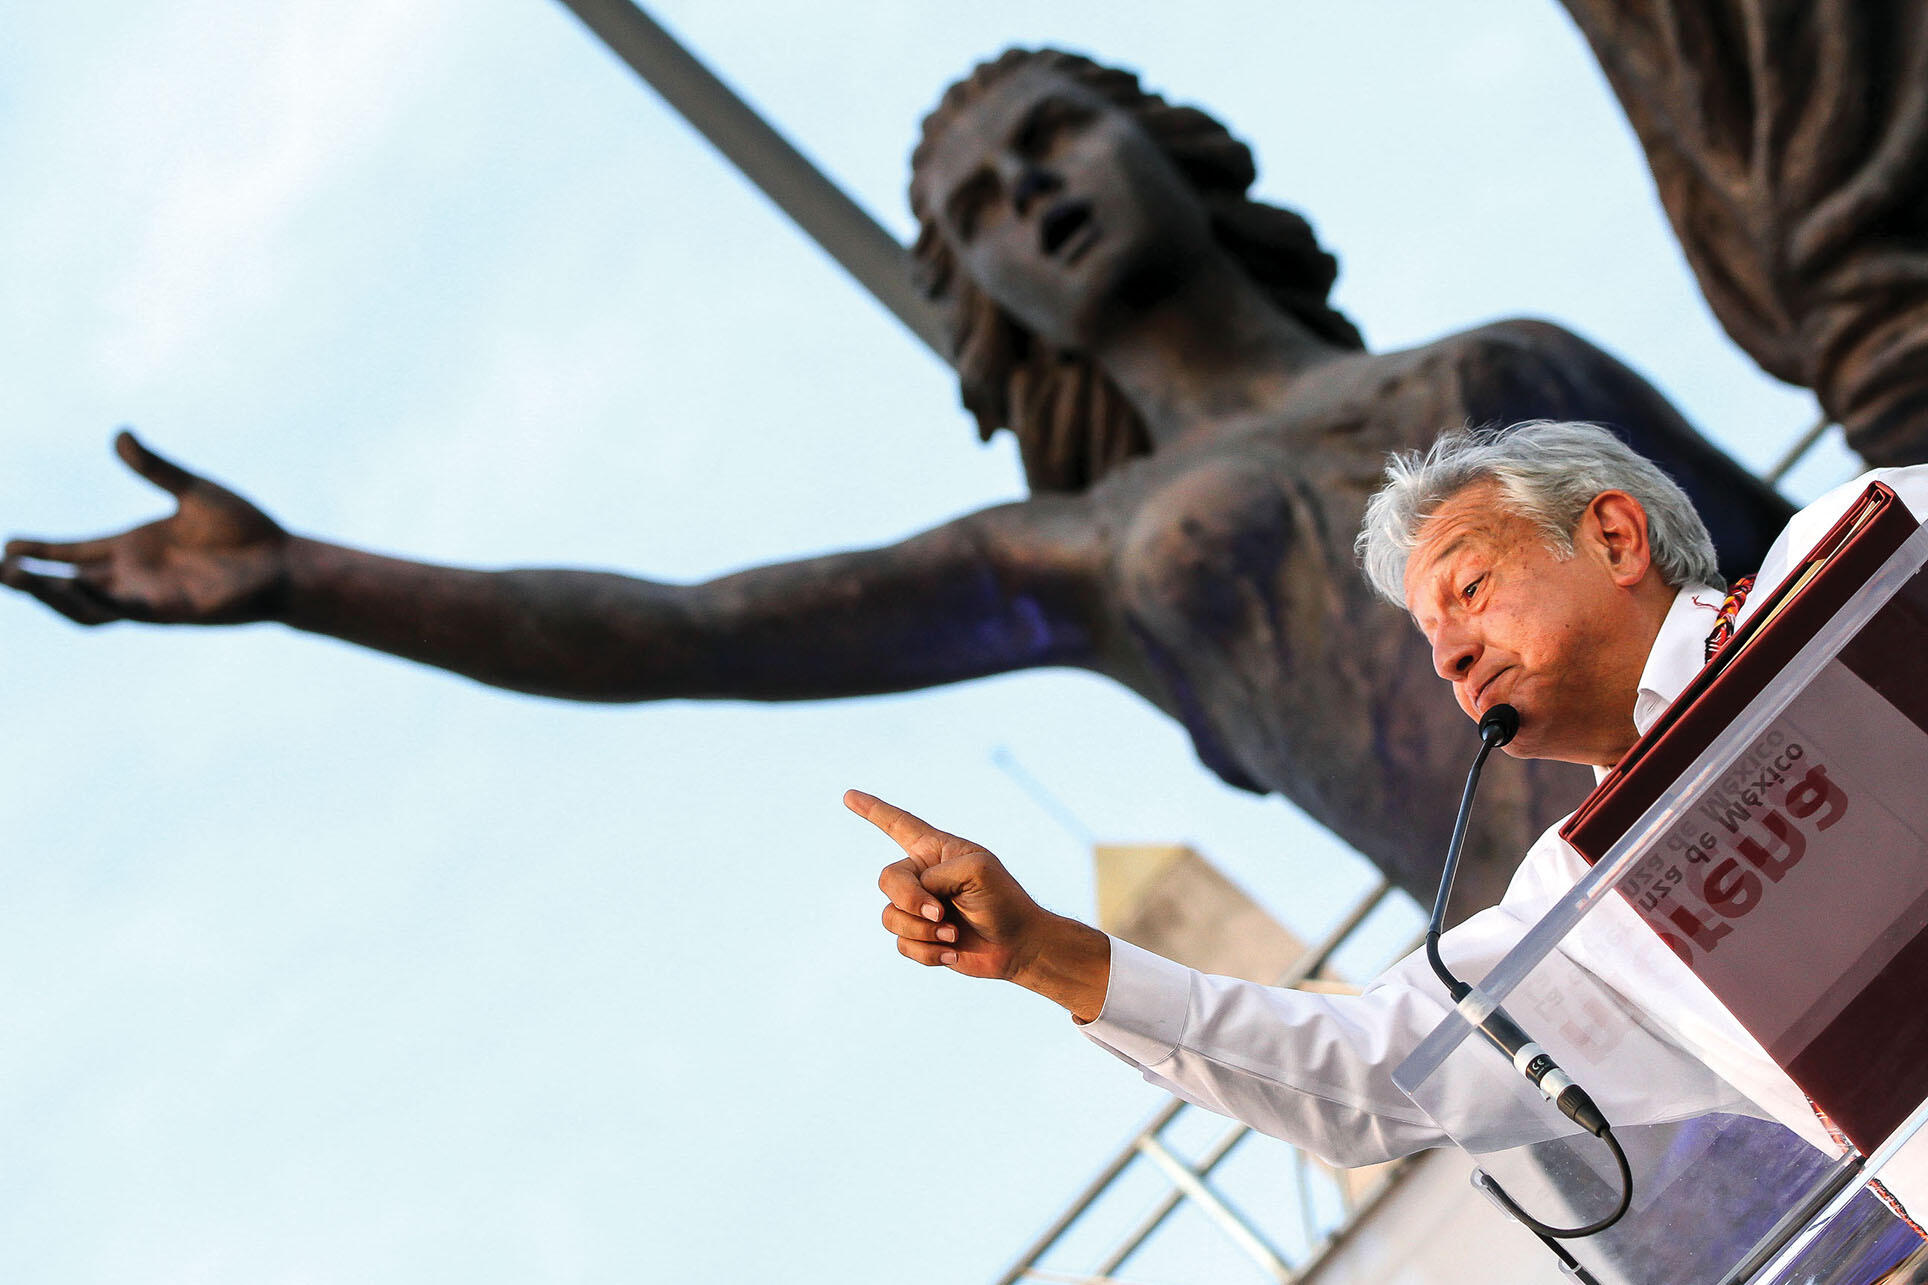 Andrés Manuel López Obrador campaigning in front of a statue with his arm raised in a similar pose  in Guadalajara in 2016. (Photo by Dr. Carlos Lomeli.)